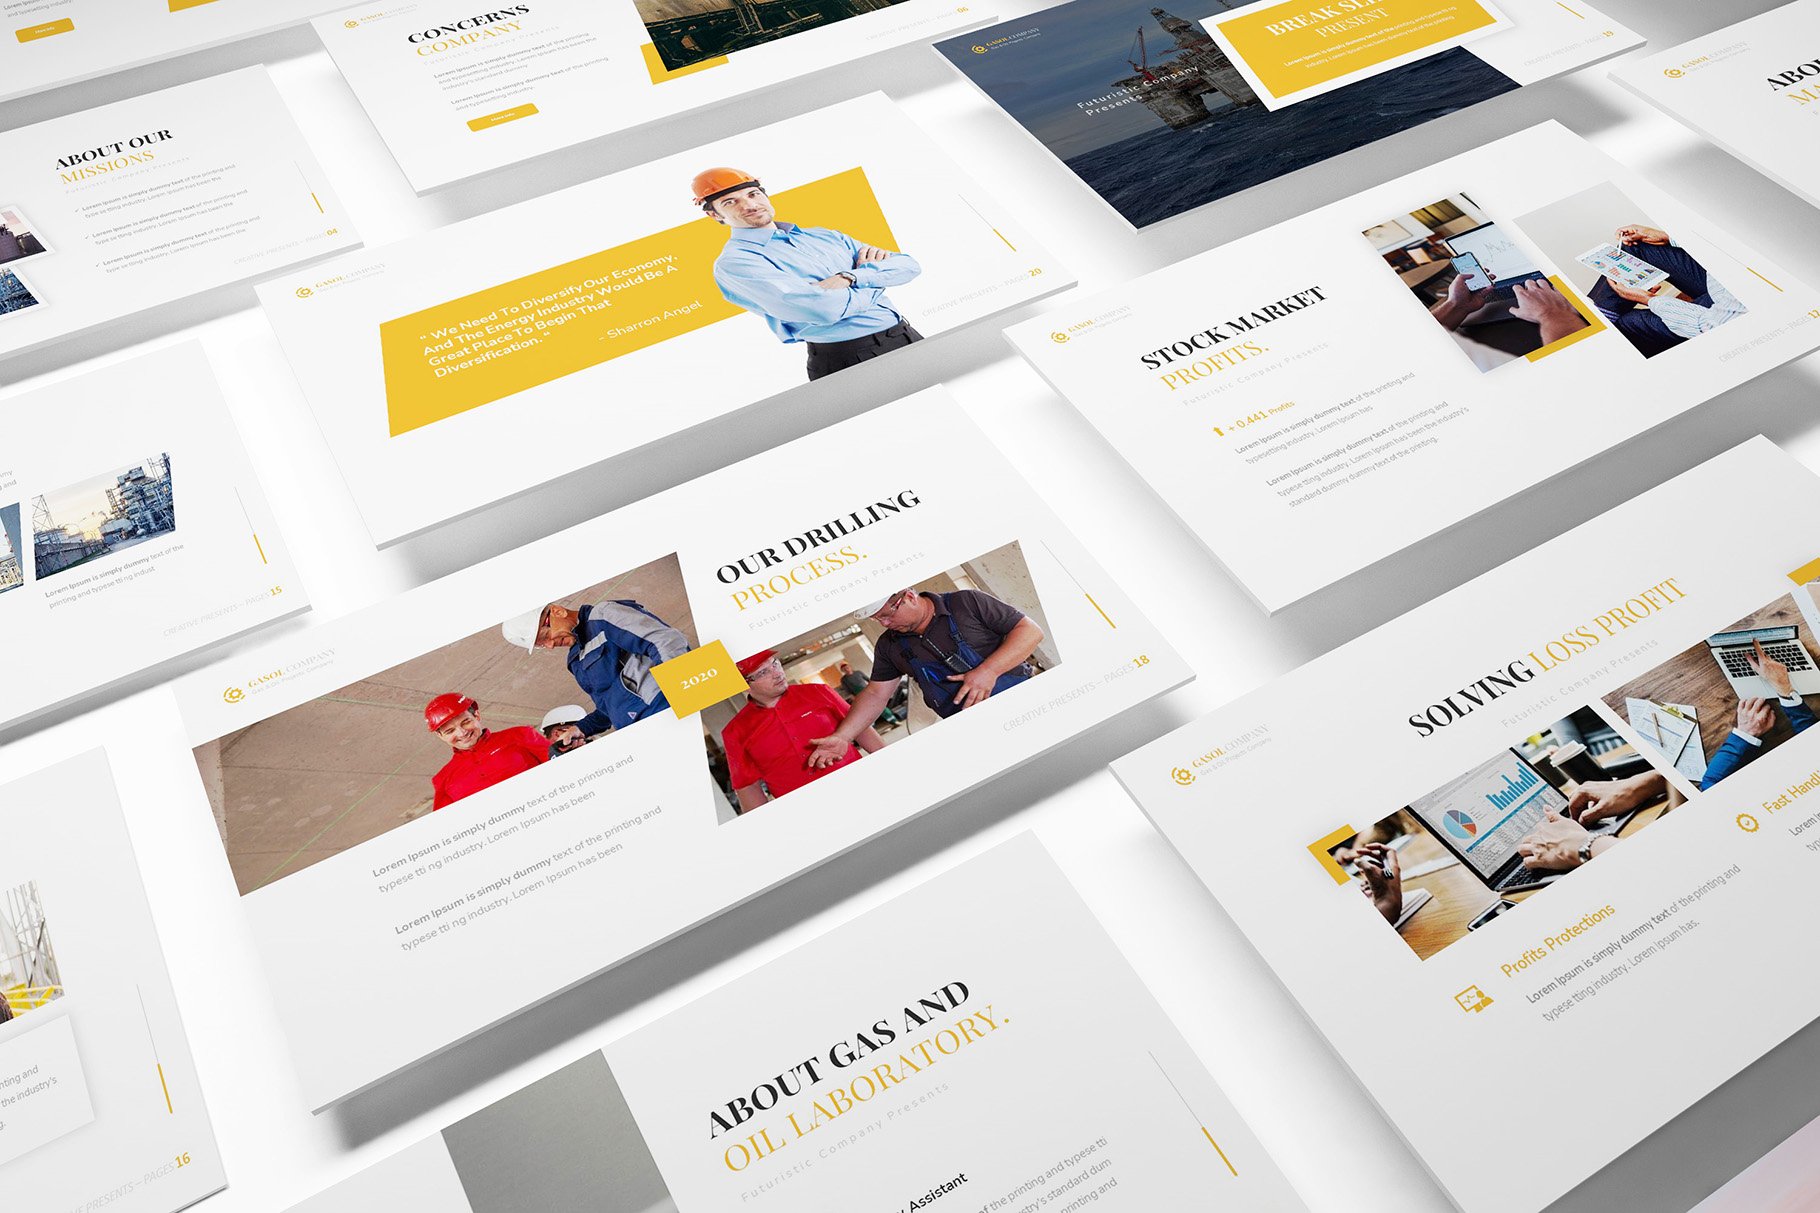 Bright yellow blocks for your presentation.